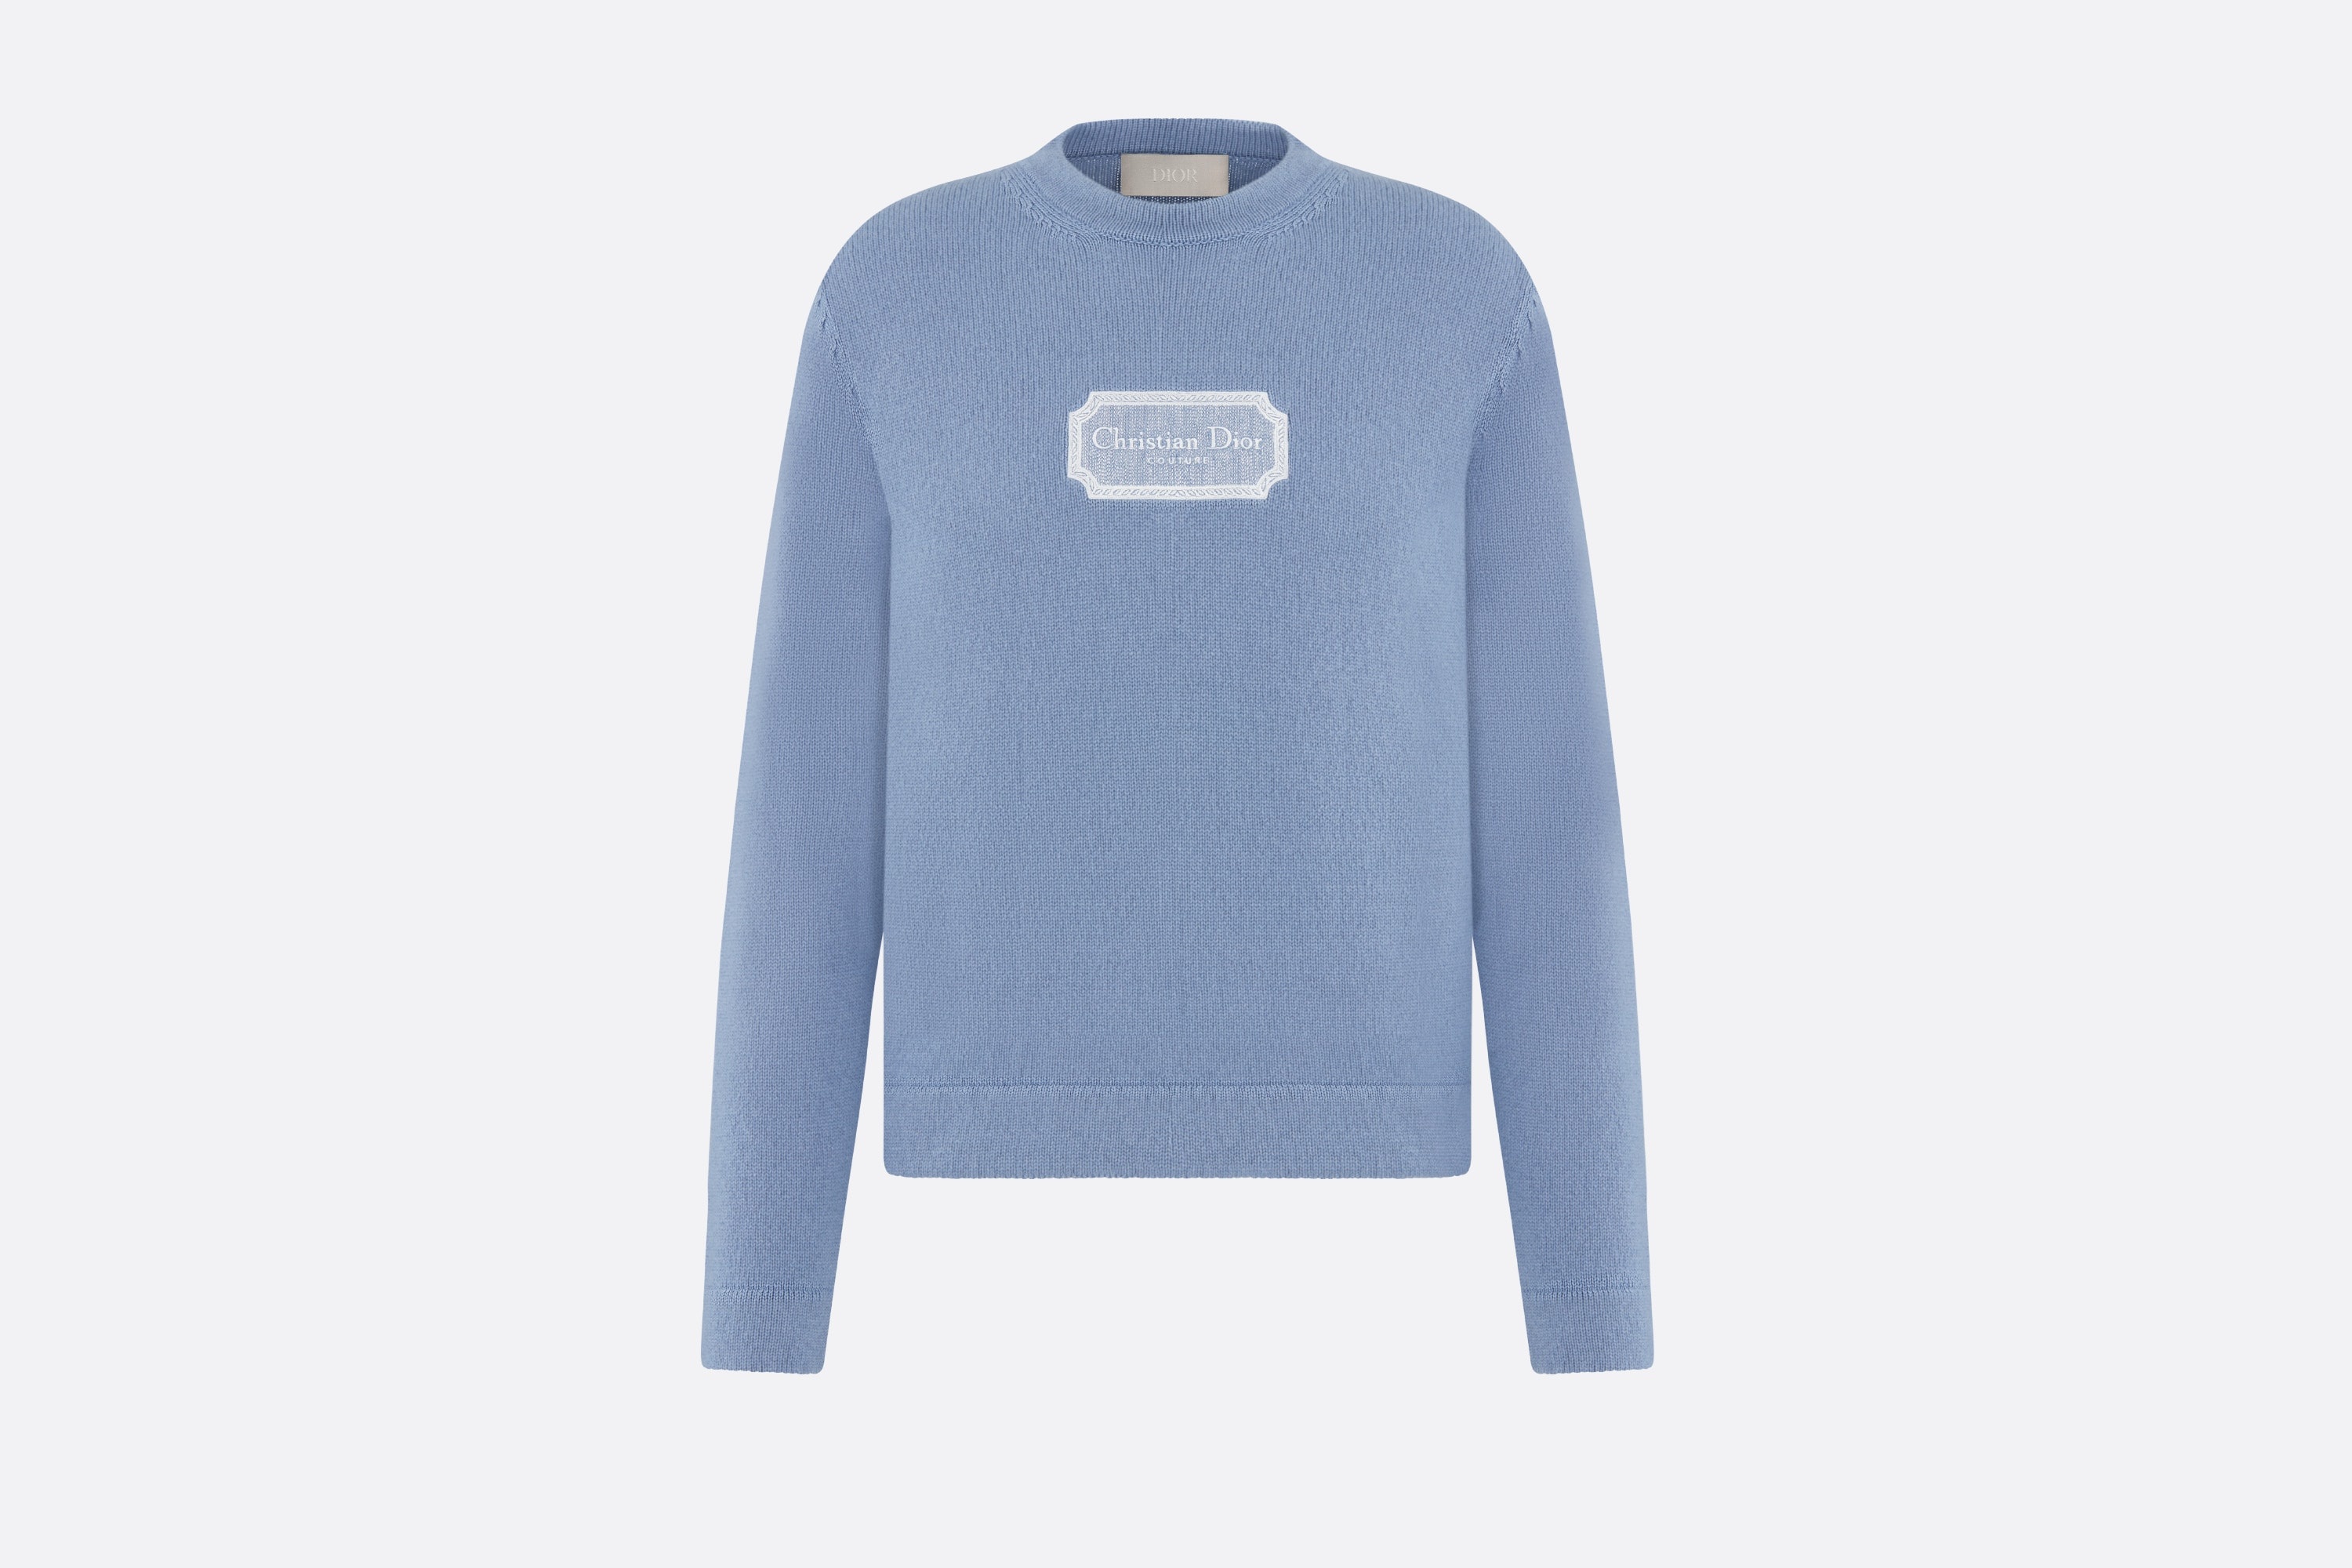 Christian Dior Couture Sweater - 1